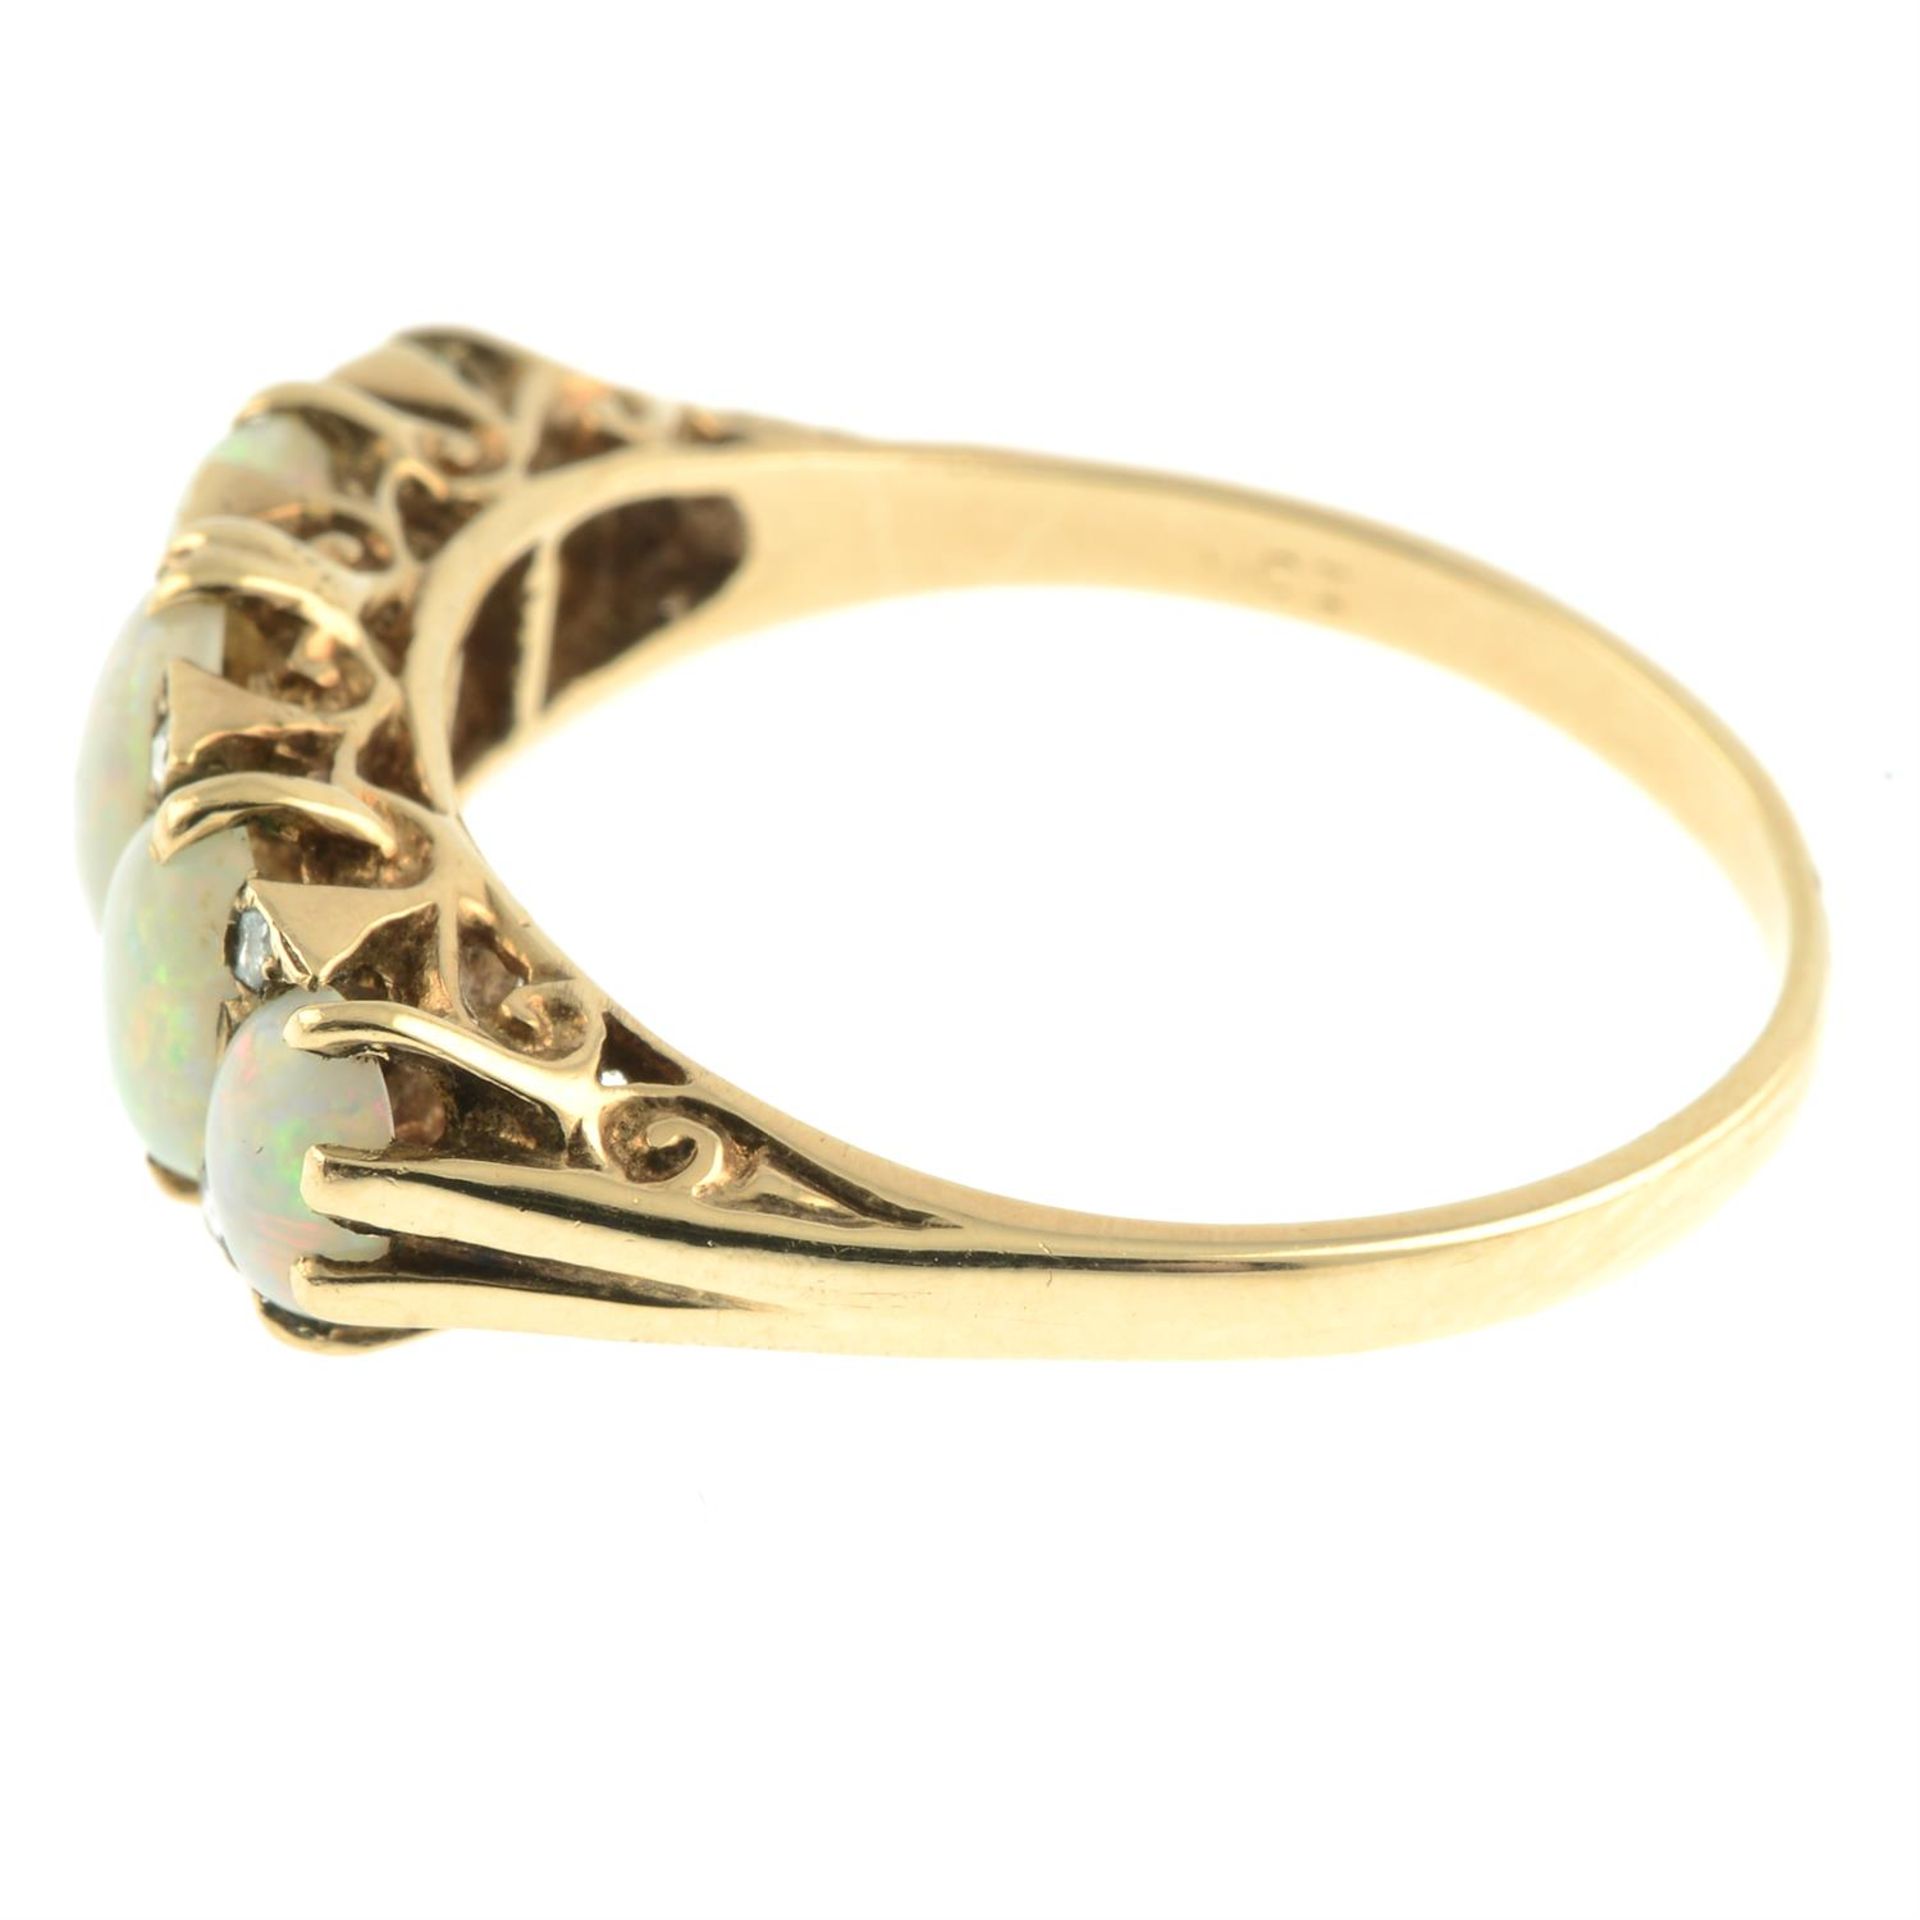 A mid 20th century 9ct gold opal five-stone ring, with rose-cut diamond spacers. - Image 3 of 5